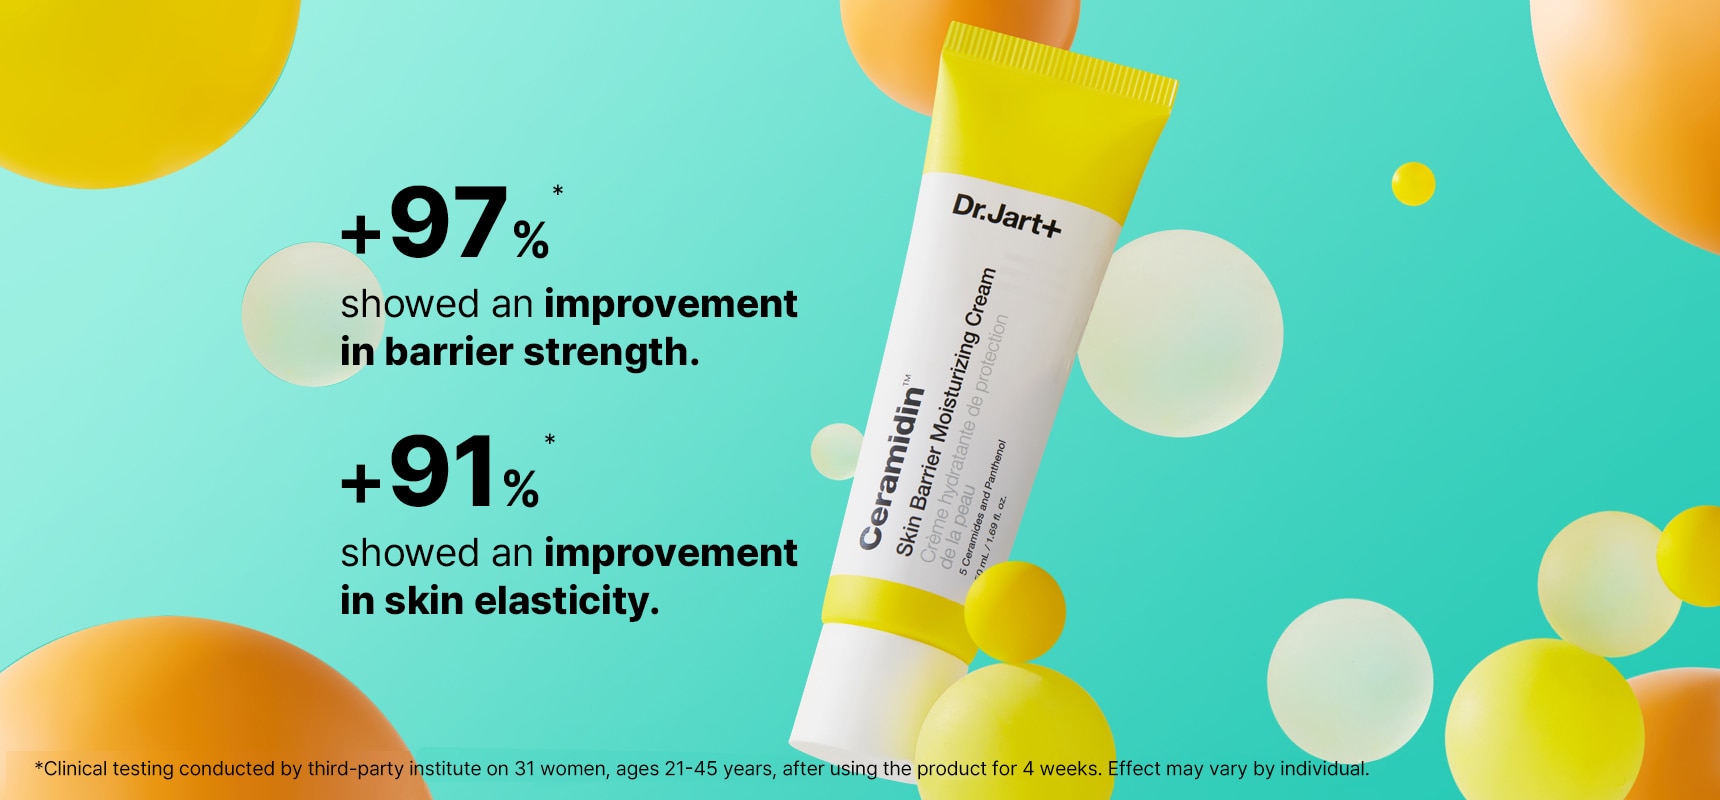 Ceramidin Cream tube on abstract background. +97% showed improvement in barrier strength